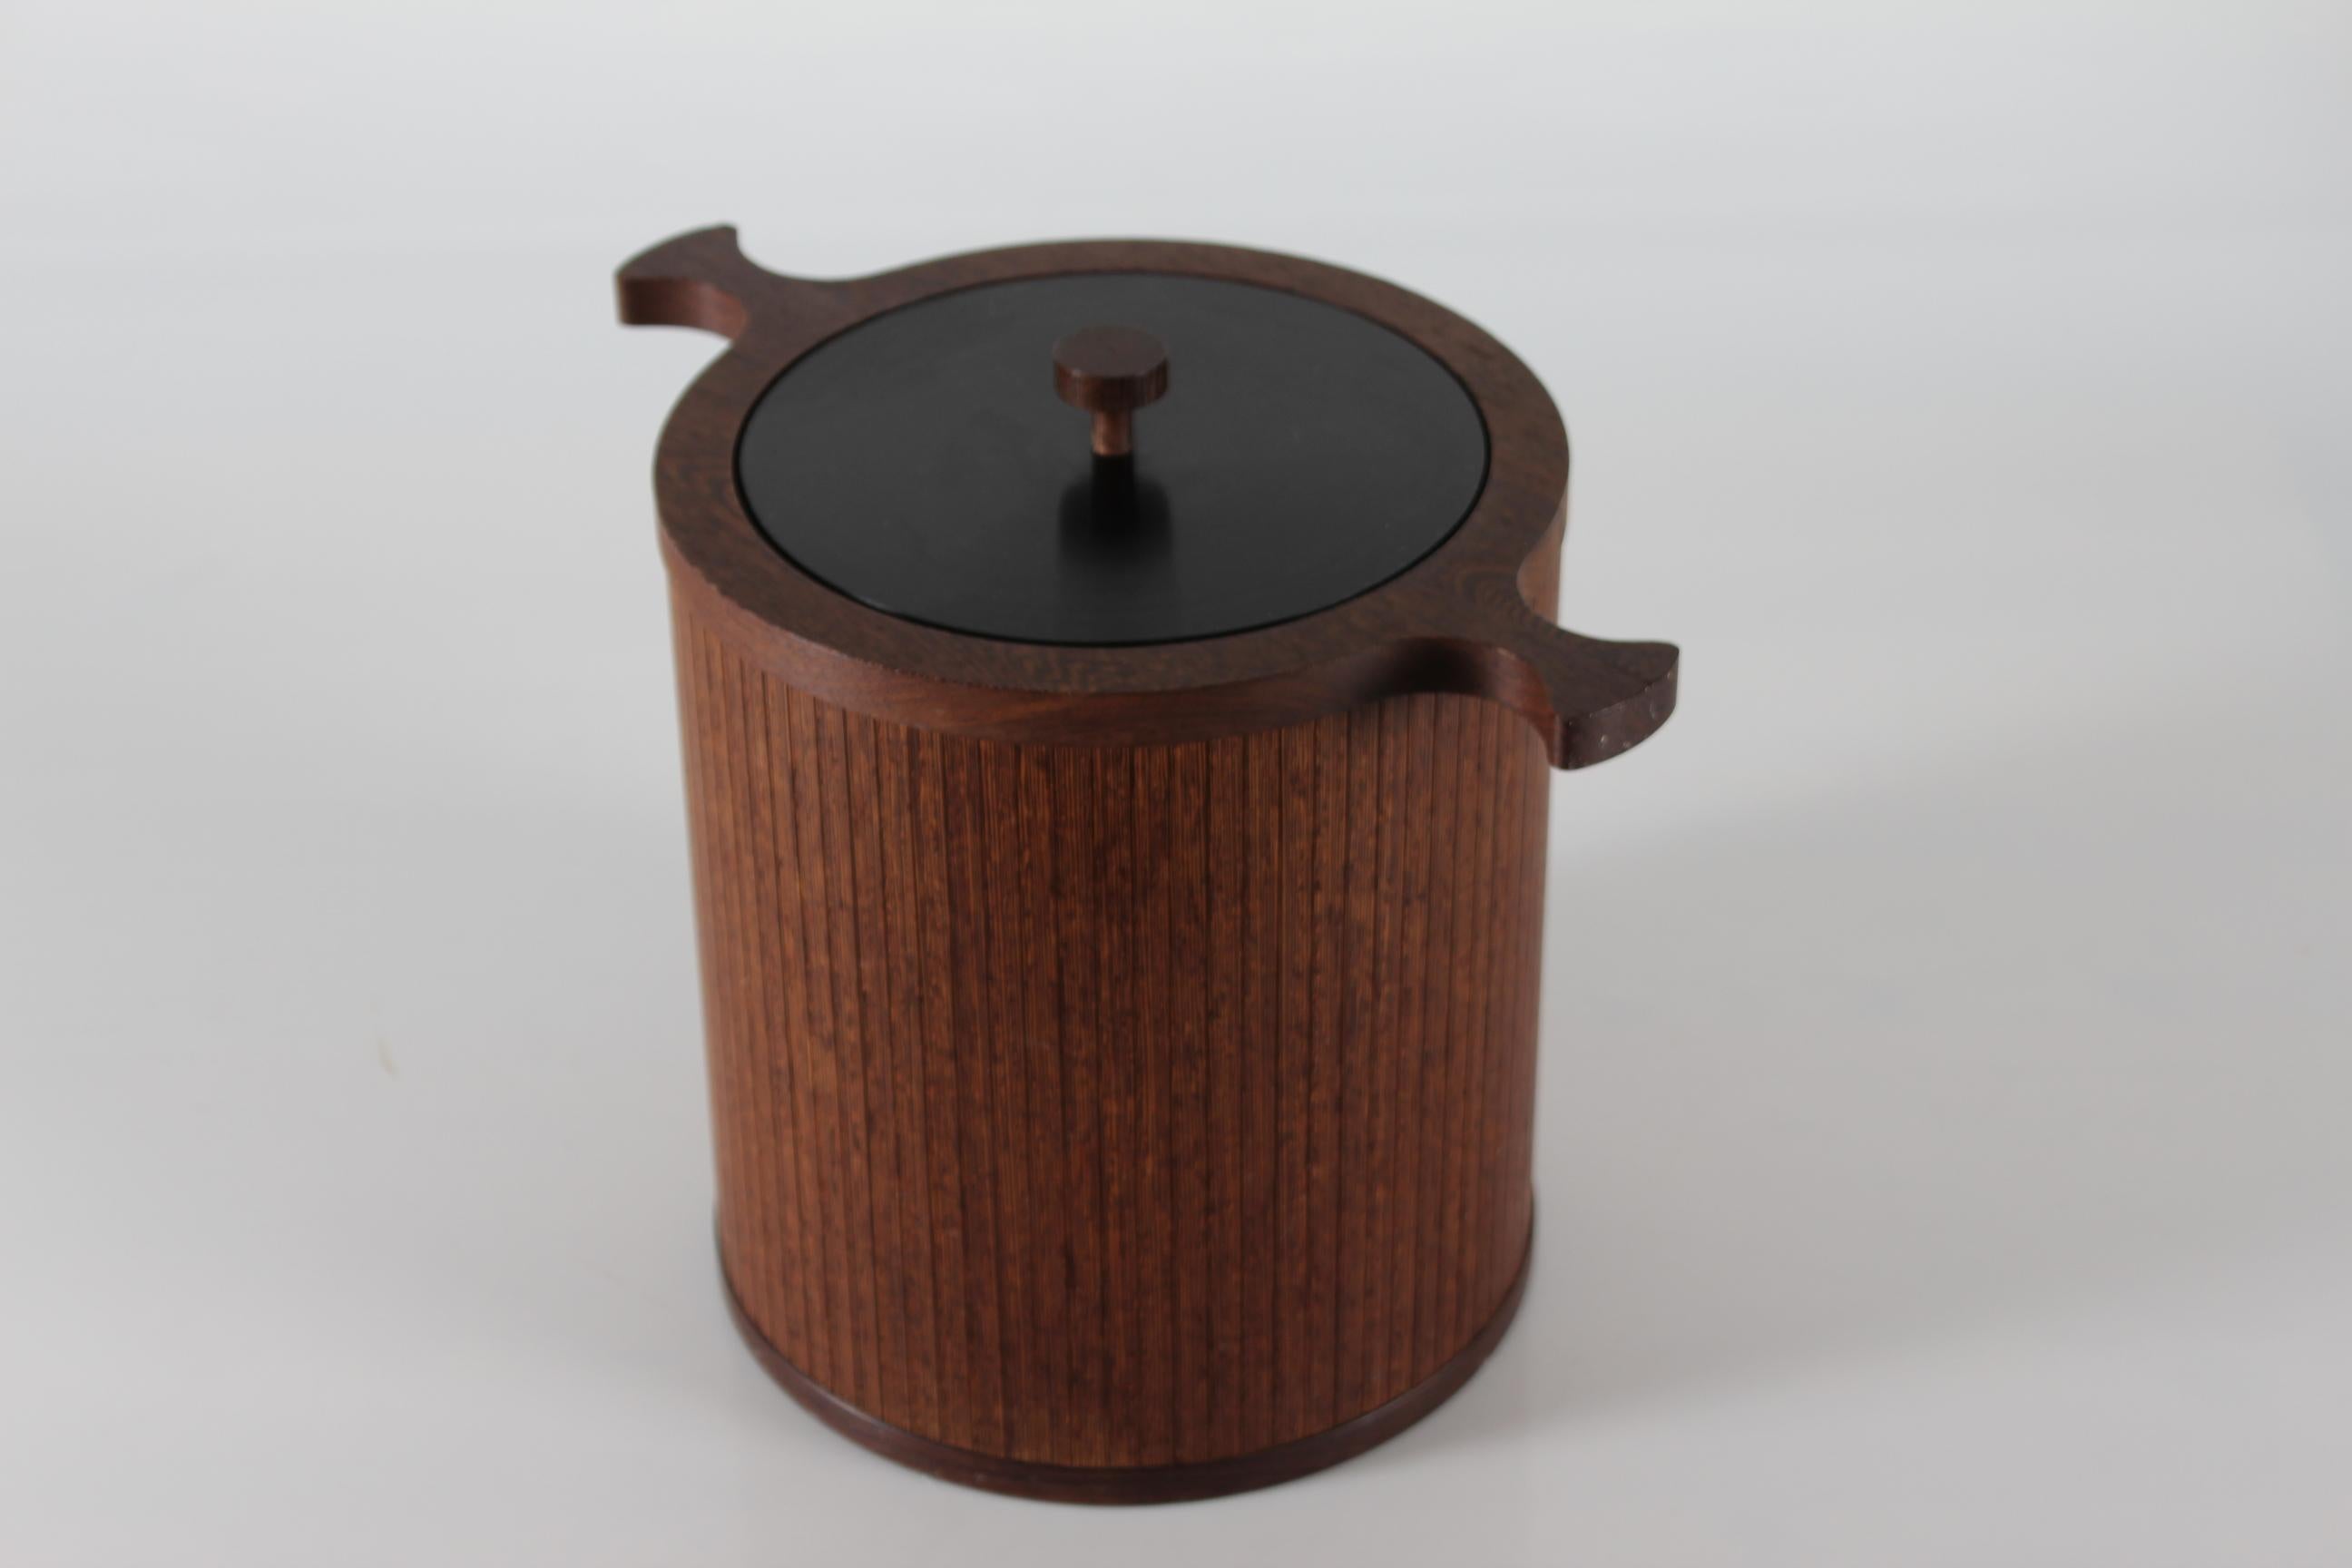 Huge Danish ice bucket by Theodor Skjøde Knudsen made of wengé
The insulated wooden bucket has a lid made of black plastic and a white plastic insert.

Measures: diameter 25 cm
Length with handles 38 cm

Stamped: Skjøde Denmark

Very nice